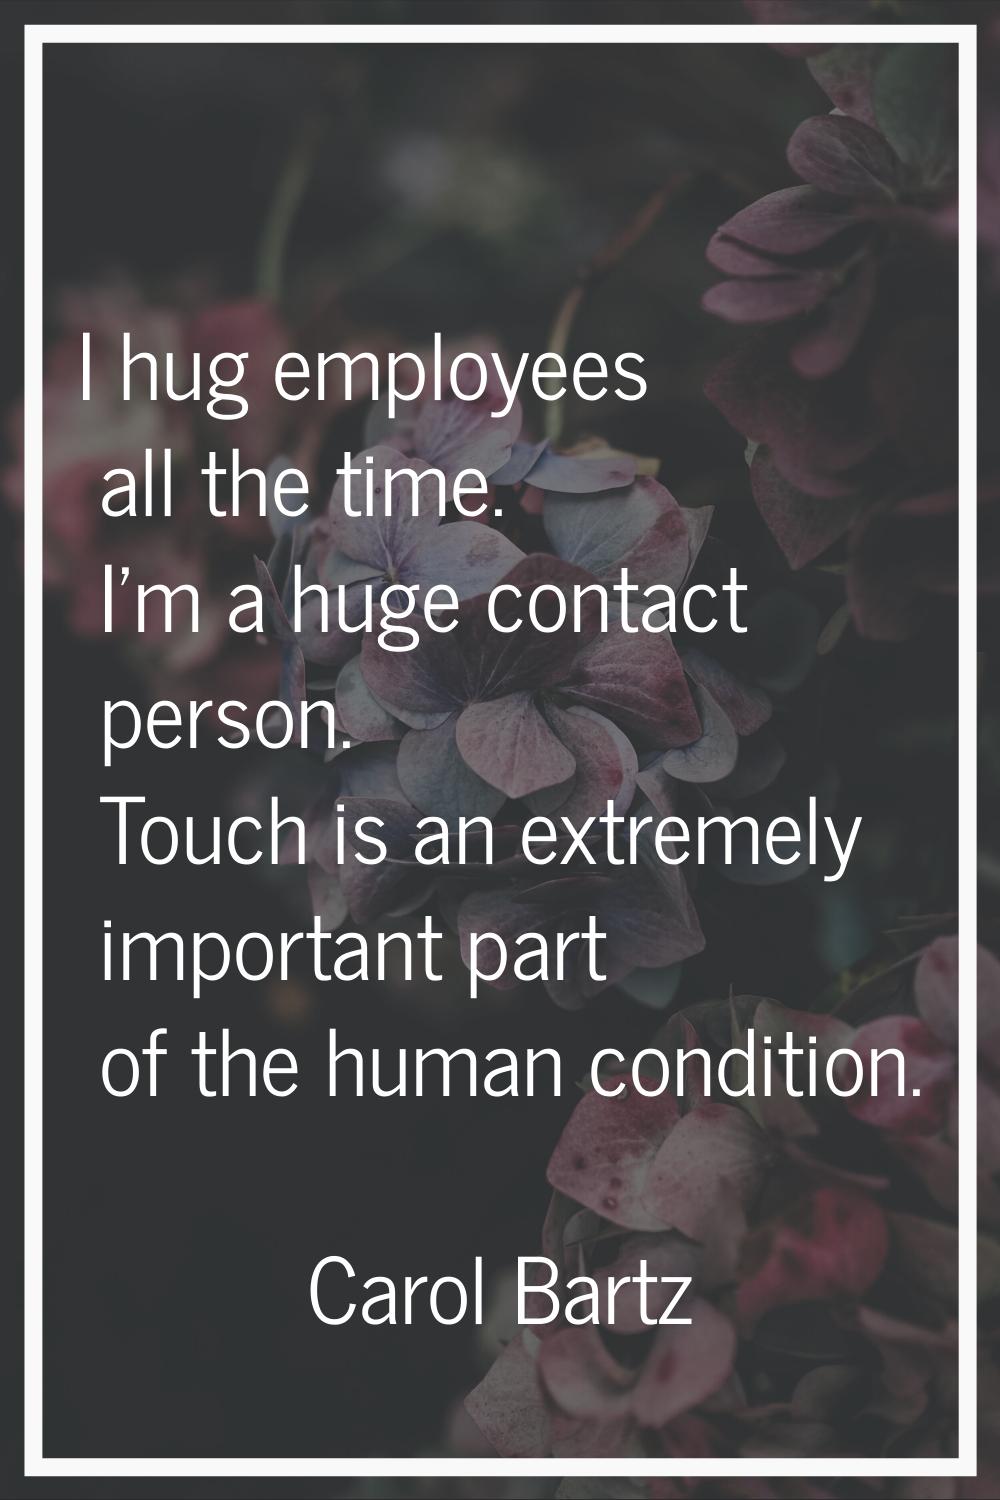 I hug employees all the time. I'm a huge contact person. Touch is an extremely important part of th